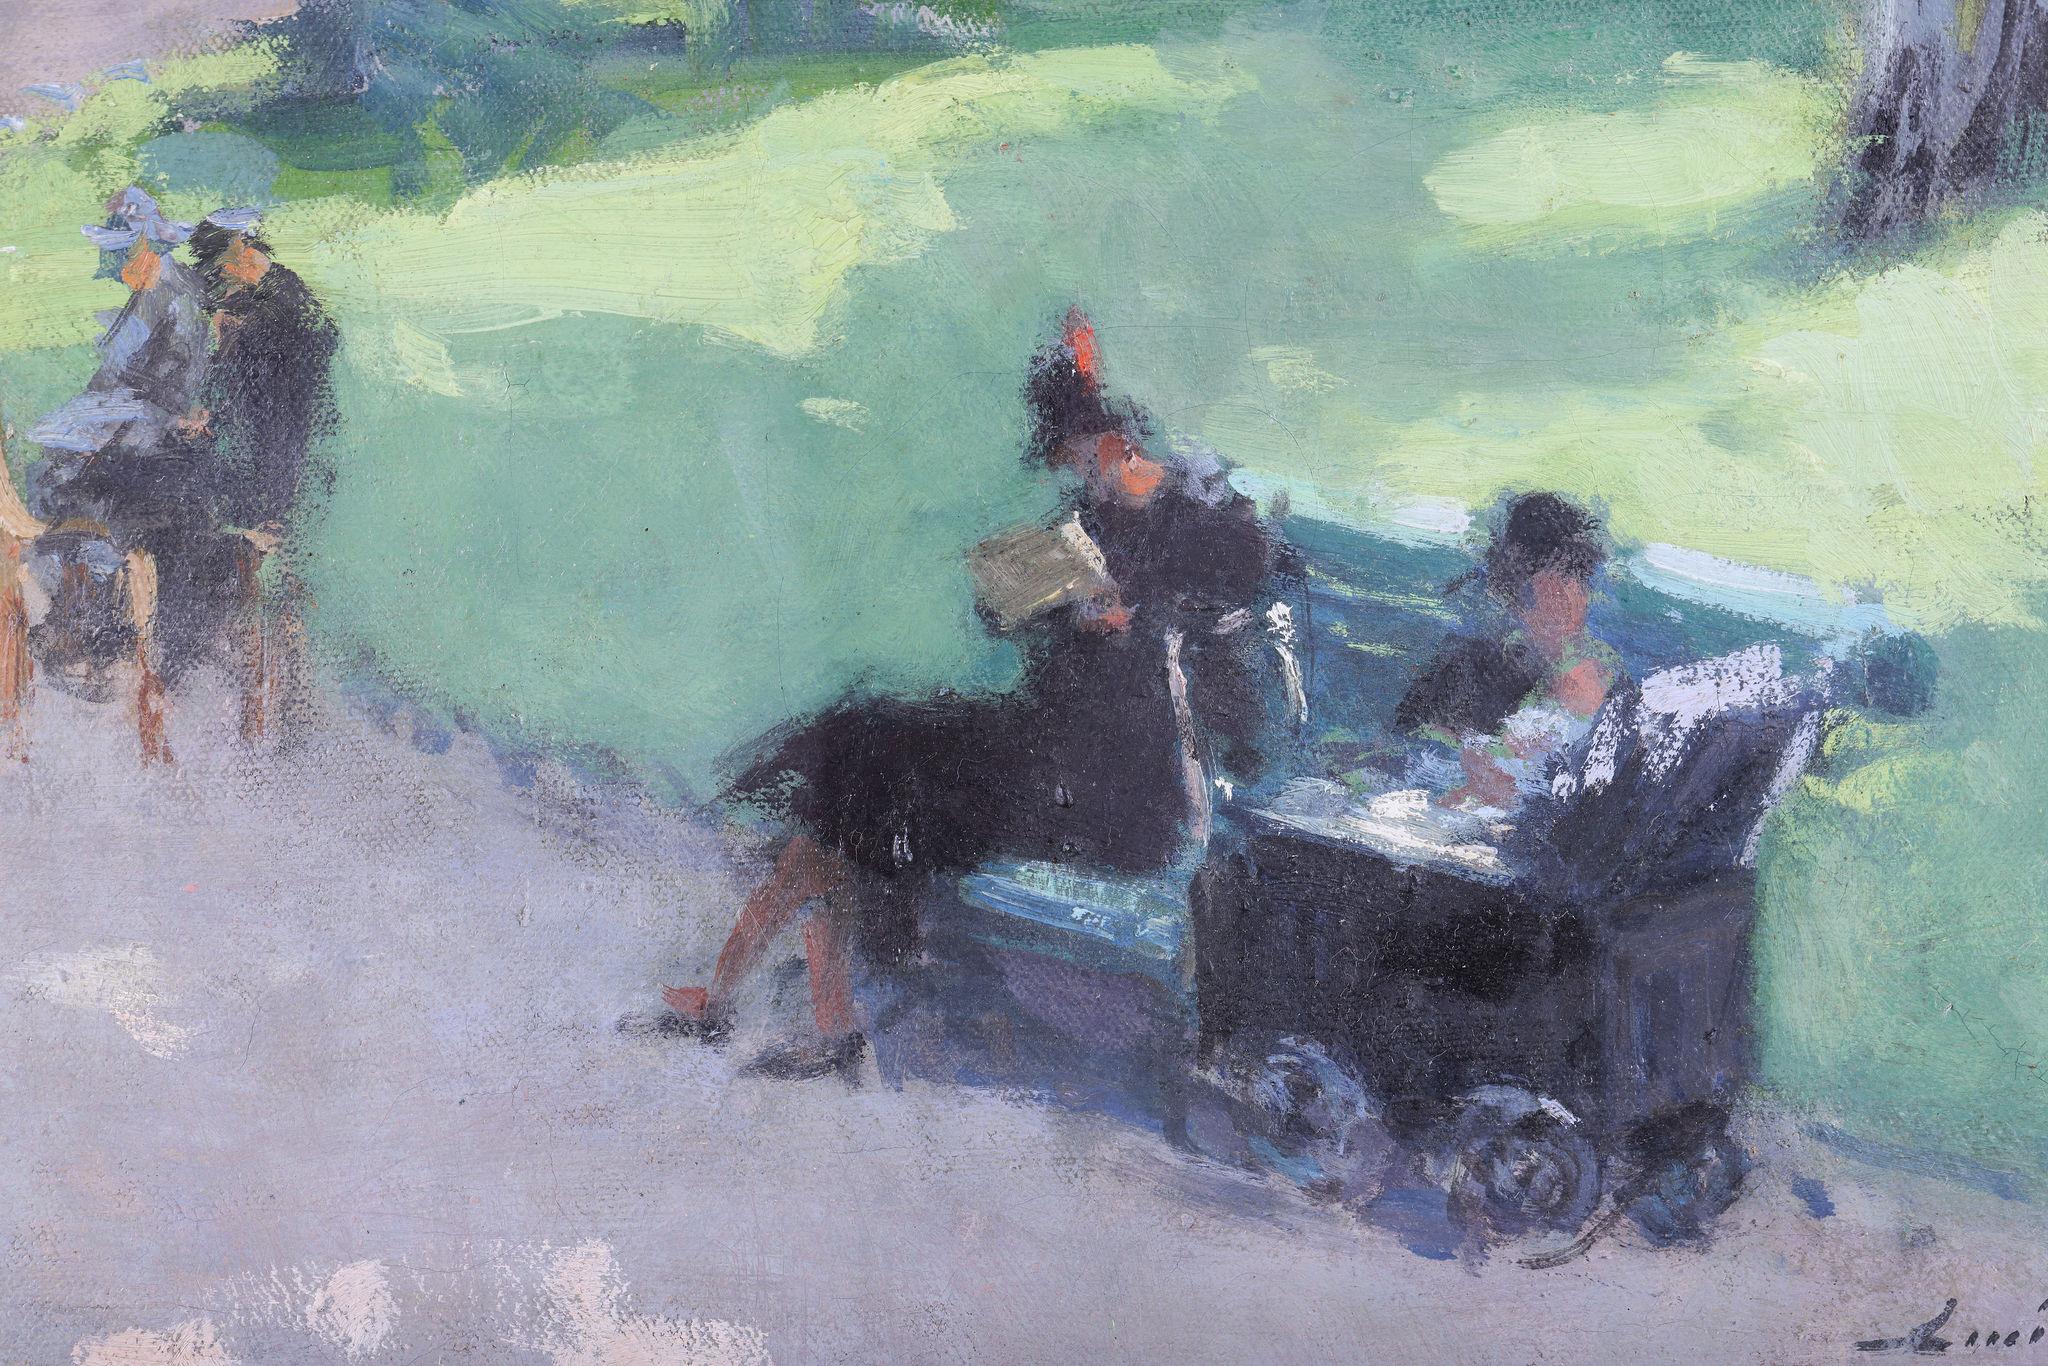 A Fun Day at the Park - Impressionist Painting by Lucienne Bisson